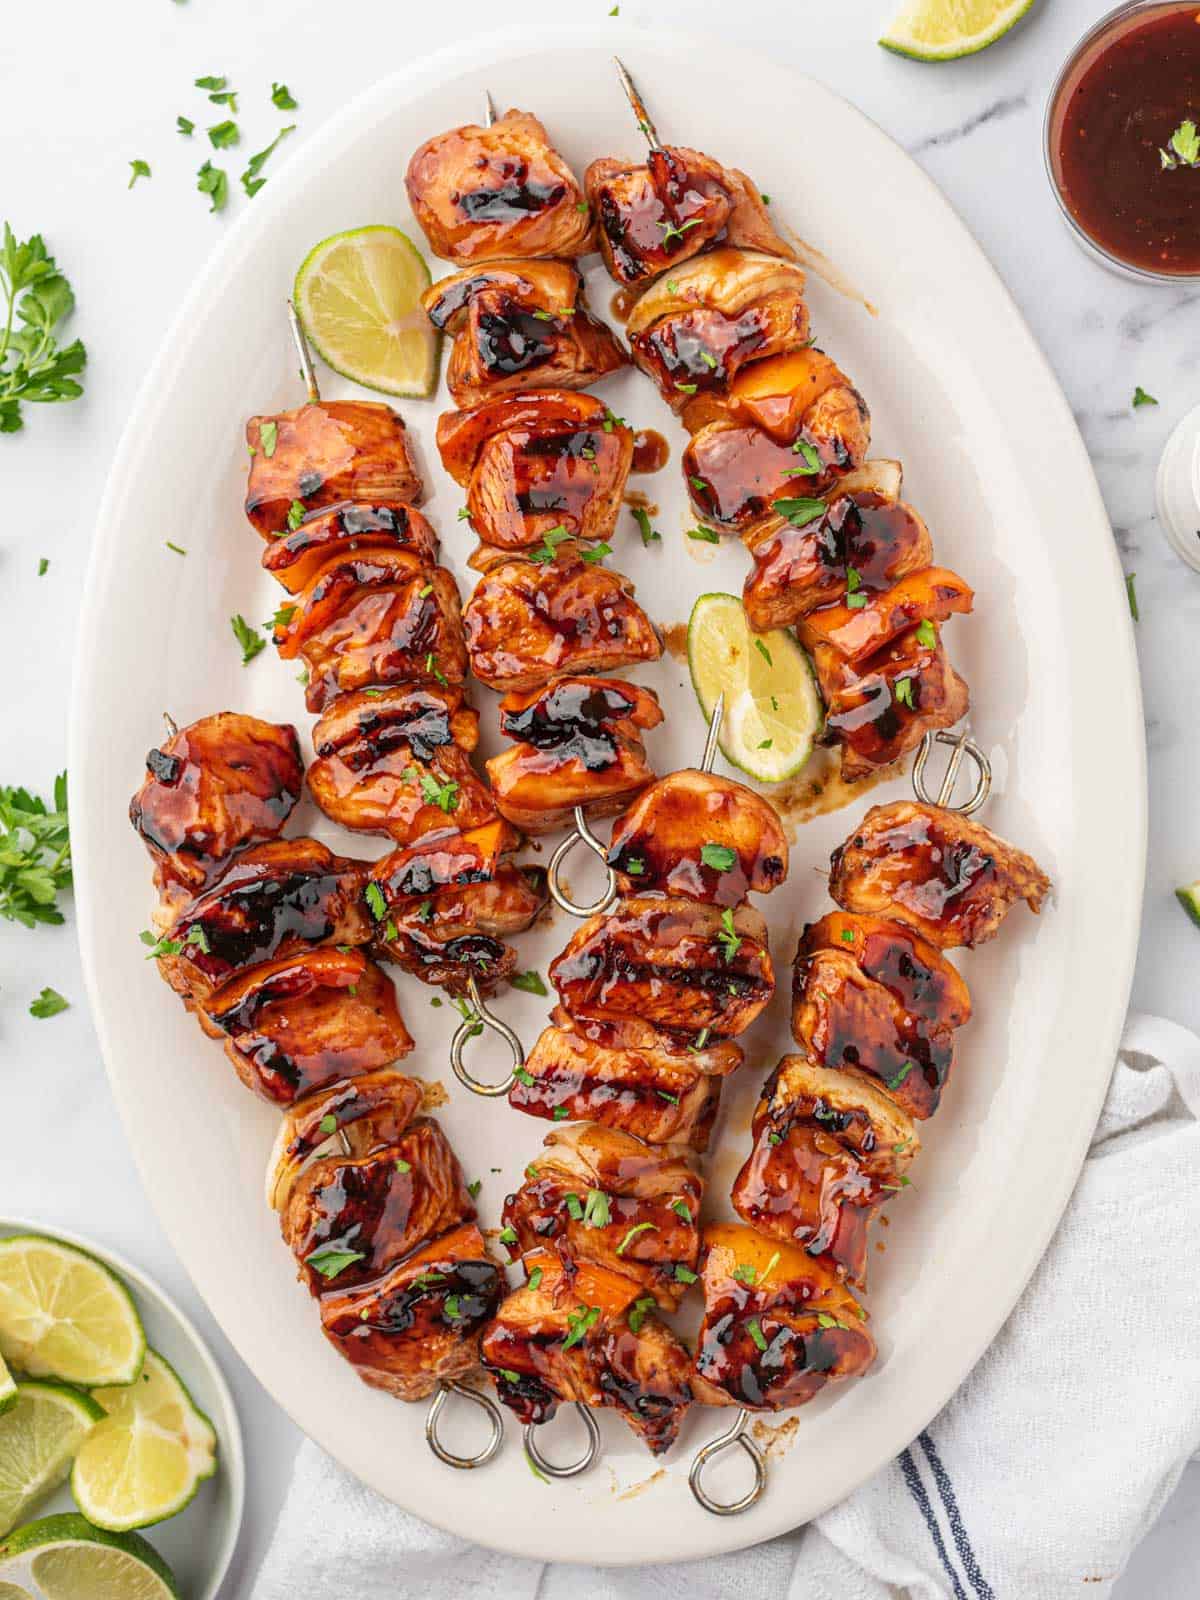 Grilled Honey, Lime & Sriracha Chicken Skewers